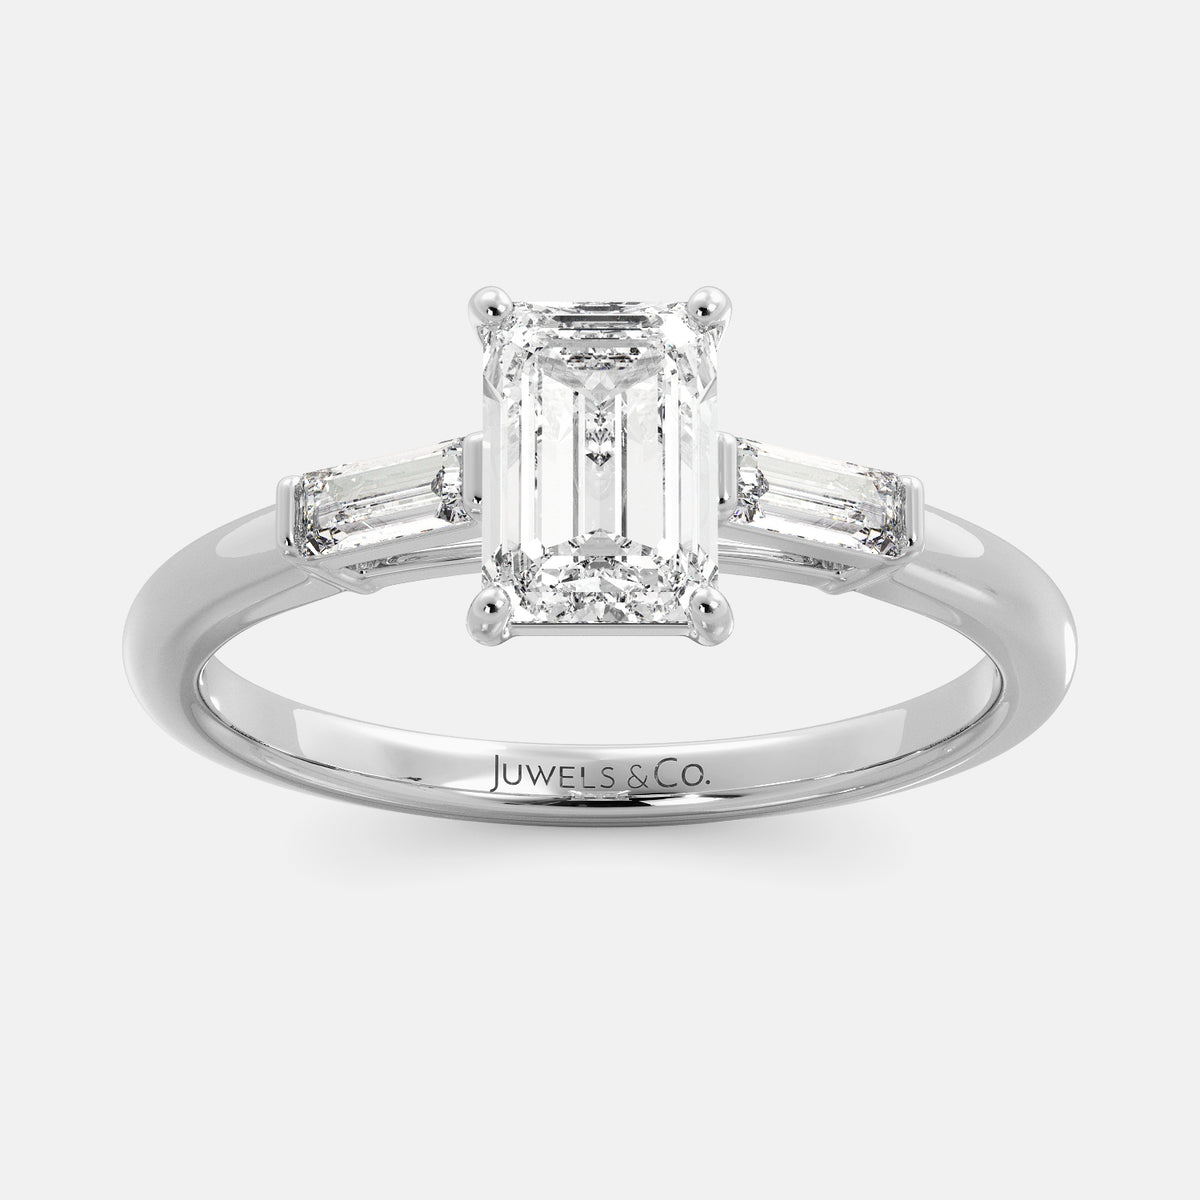 The Emerald Solitaire Diamond Ring with Baguettes